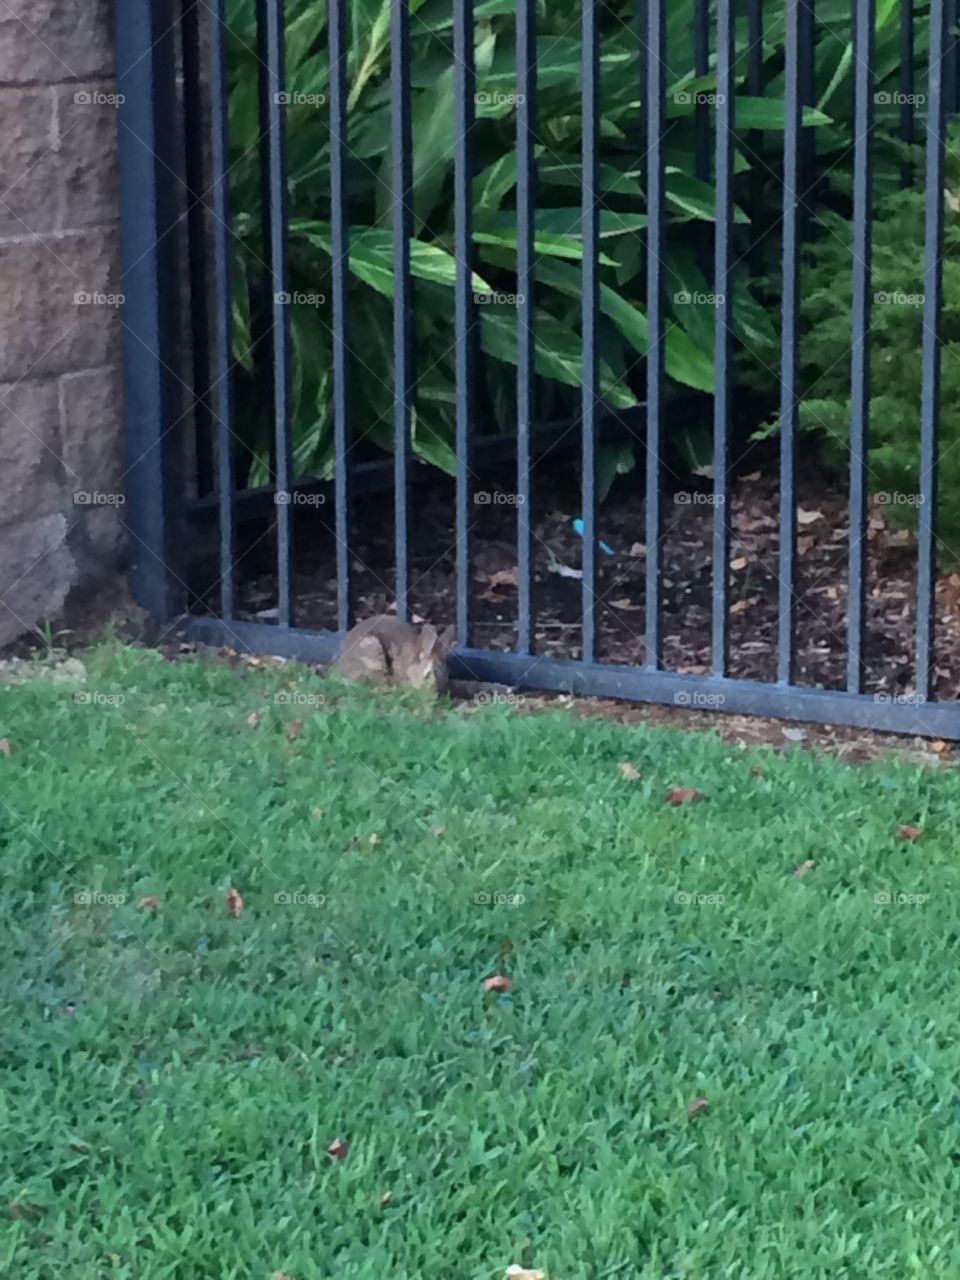 The Rabbit. Saw this rabbit hang in out.